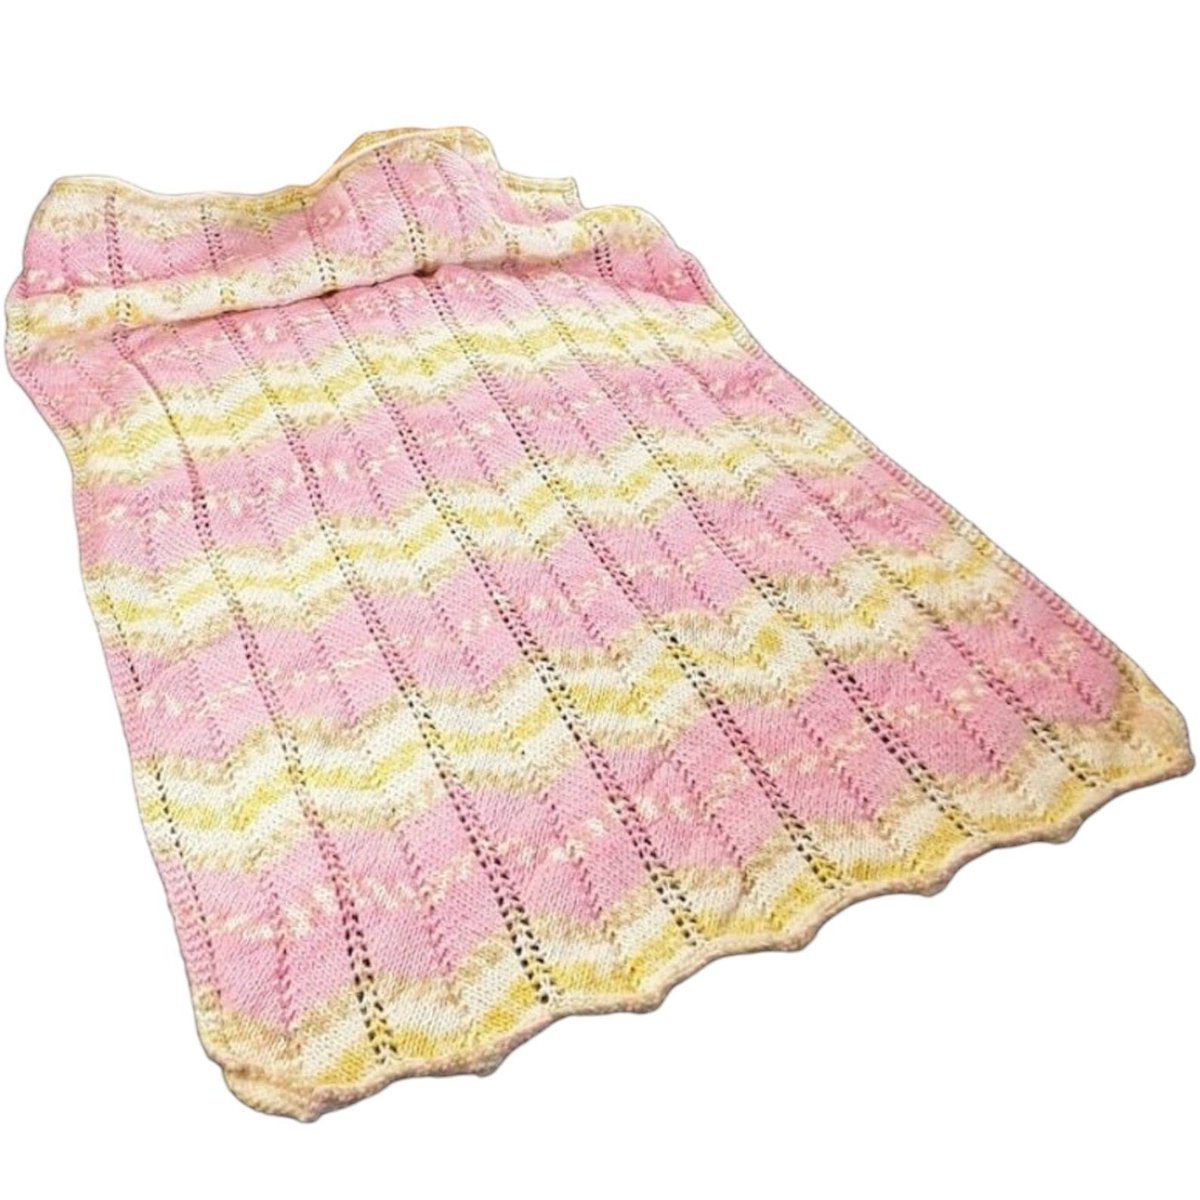 Wrap your baby in warmth and love with this hand-knitted pram blanket in a beautiful baby pink chevron pattern. Available now on #Etsy knittingtopia.etsy.com/listing/171351… #knittingtopia #handmade #uksmallbiz #handmade #tweetuk #UKHashtags #MHHSBD #craftbizparty